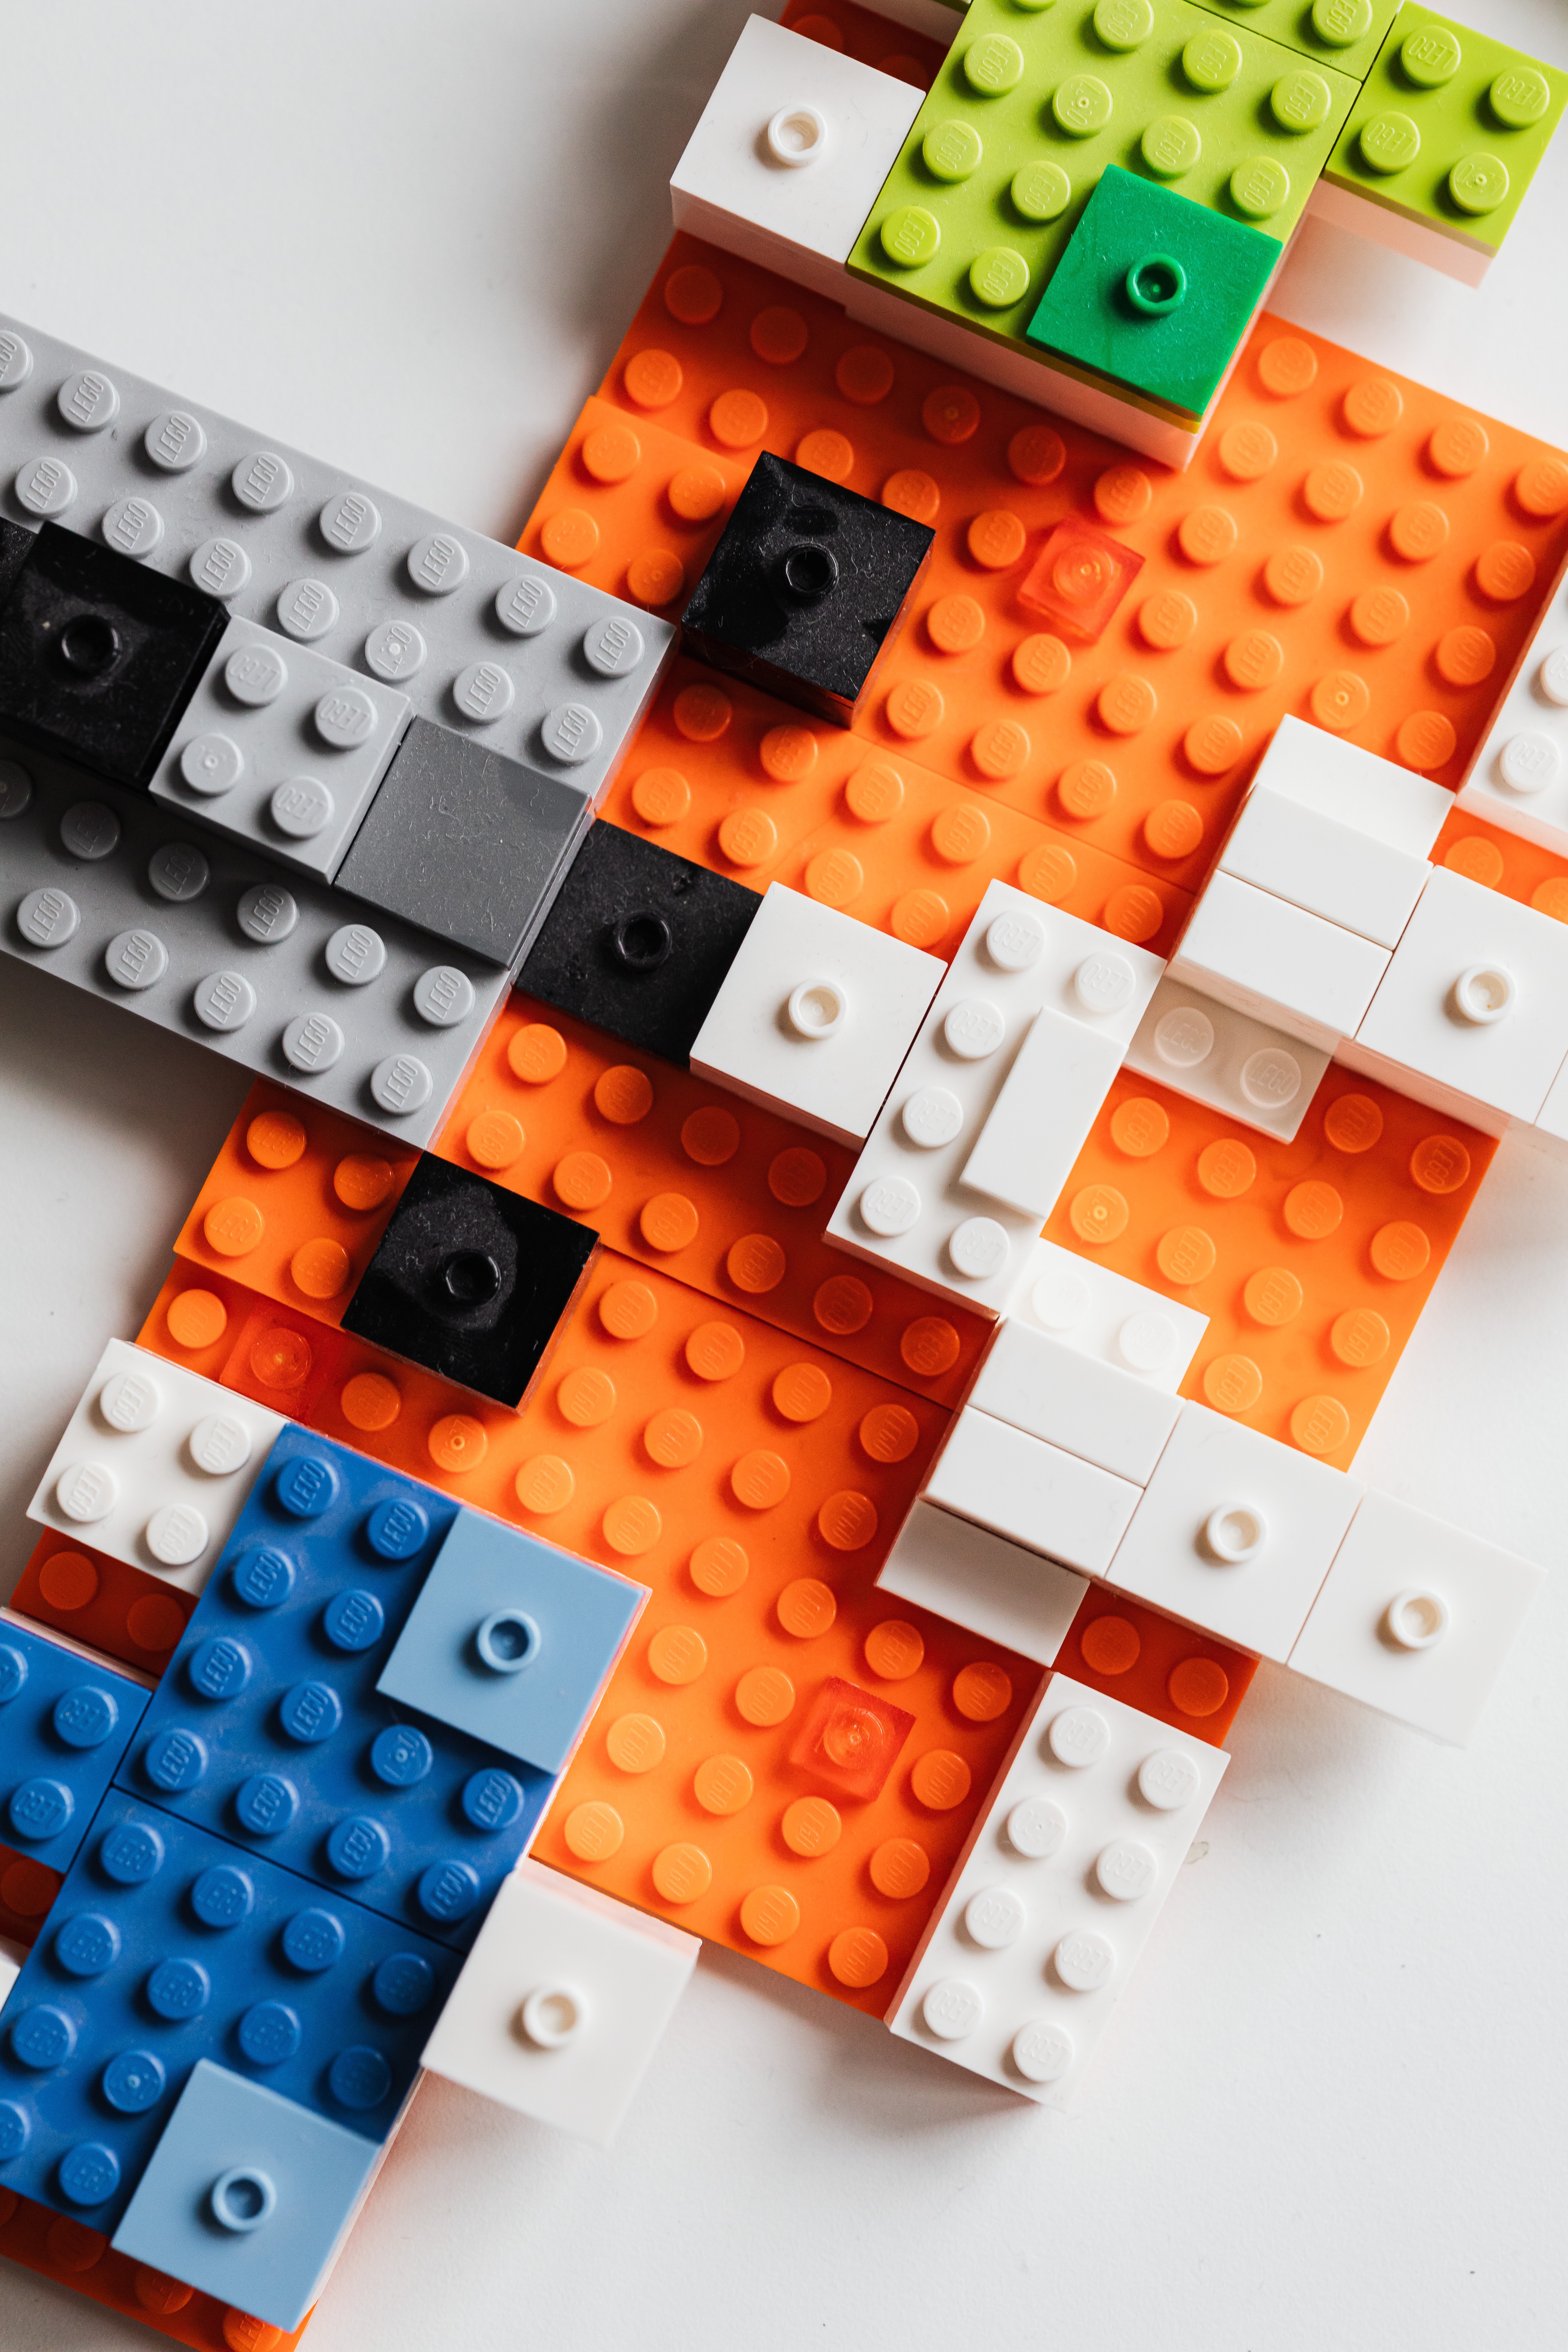 A Lego build consisting of an orange base with gray, white, green, and blue additions.